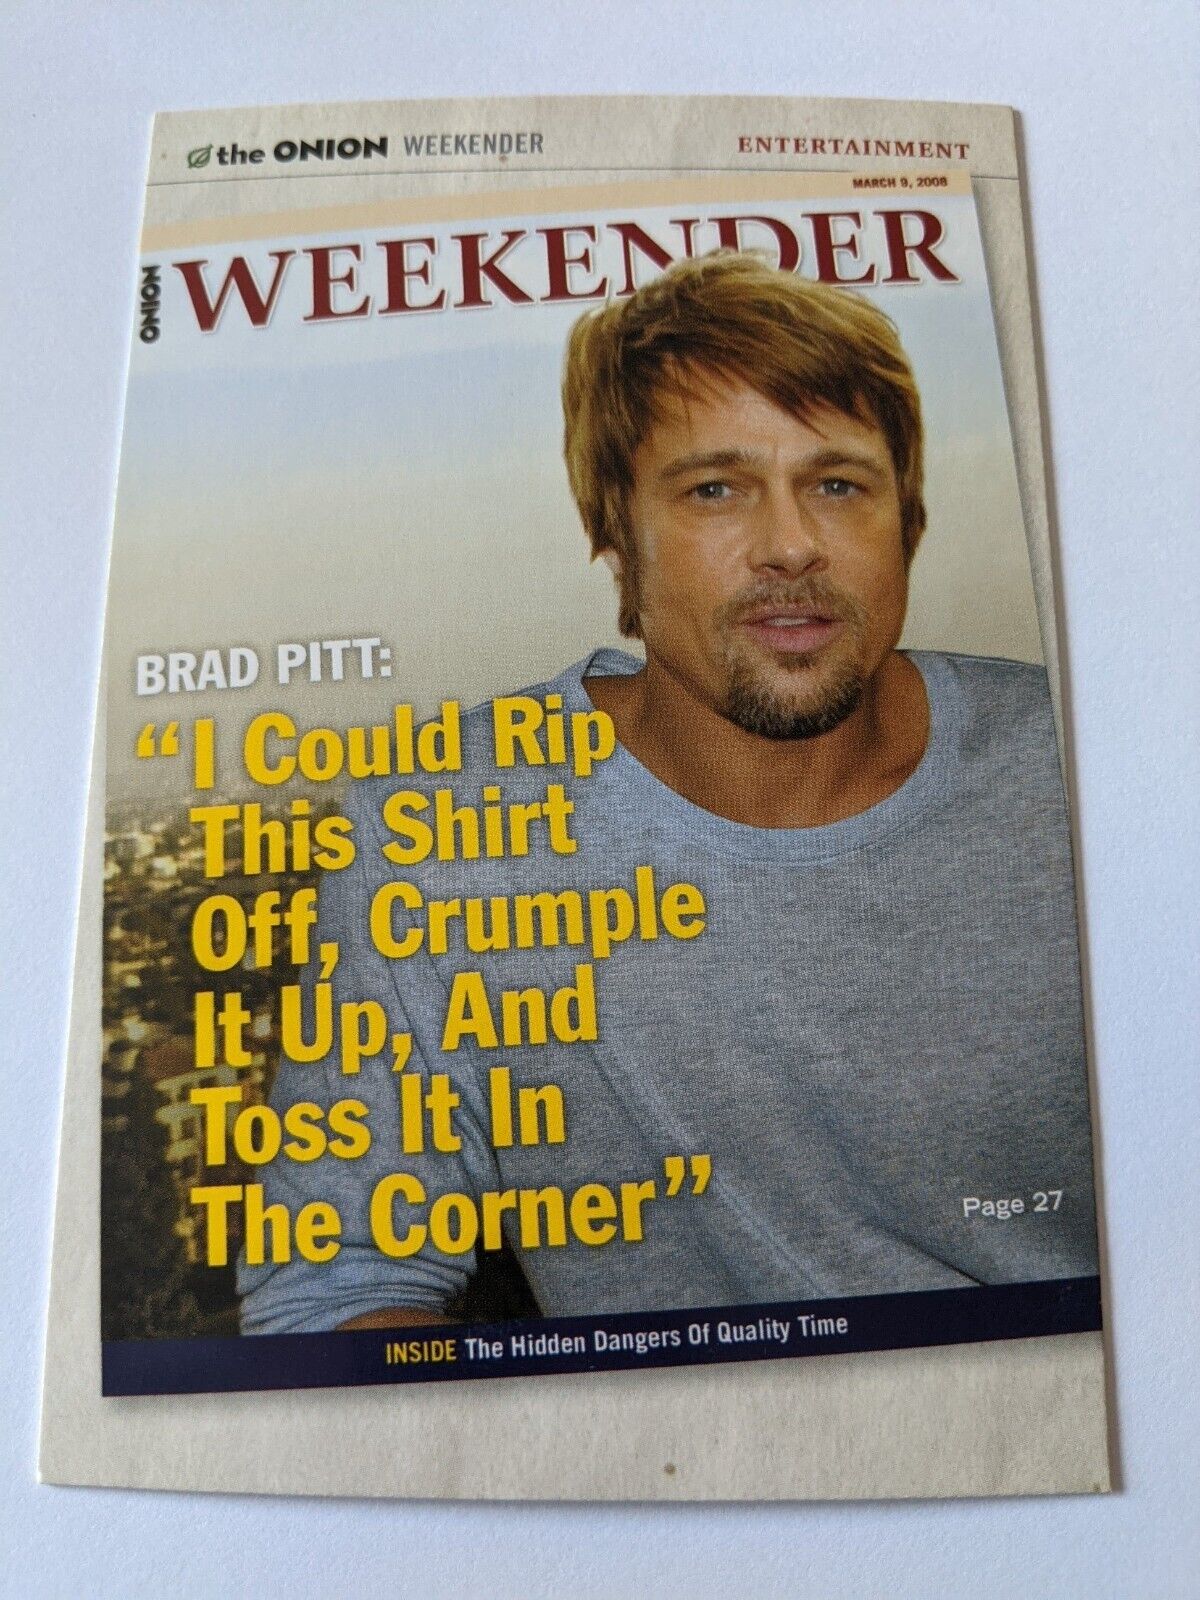 The Onion Postcard Funny Satire 2010 Brad Pitt quote & Dangers of Quality Time